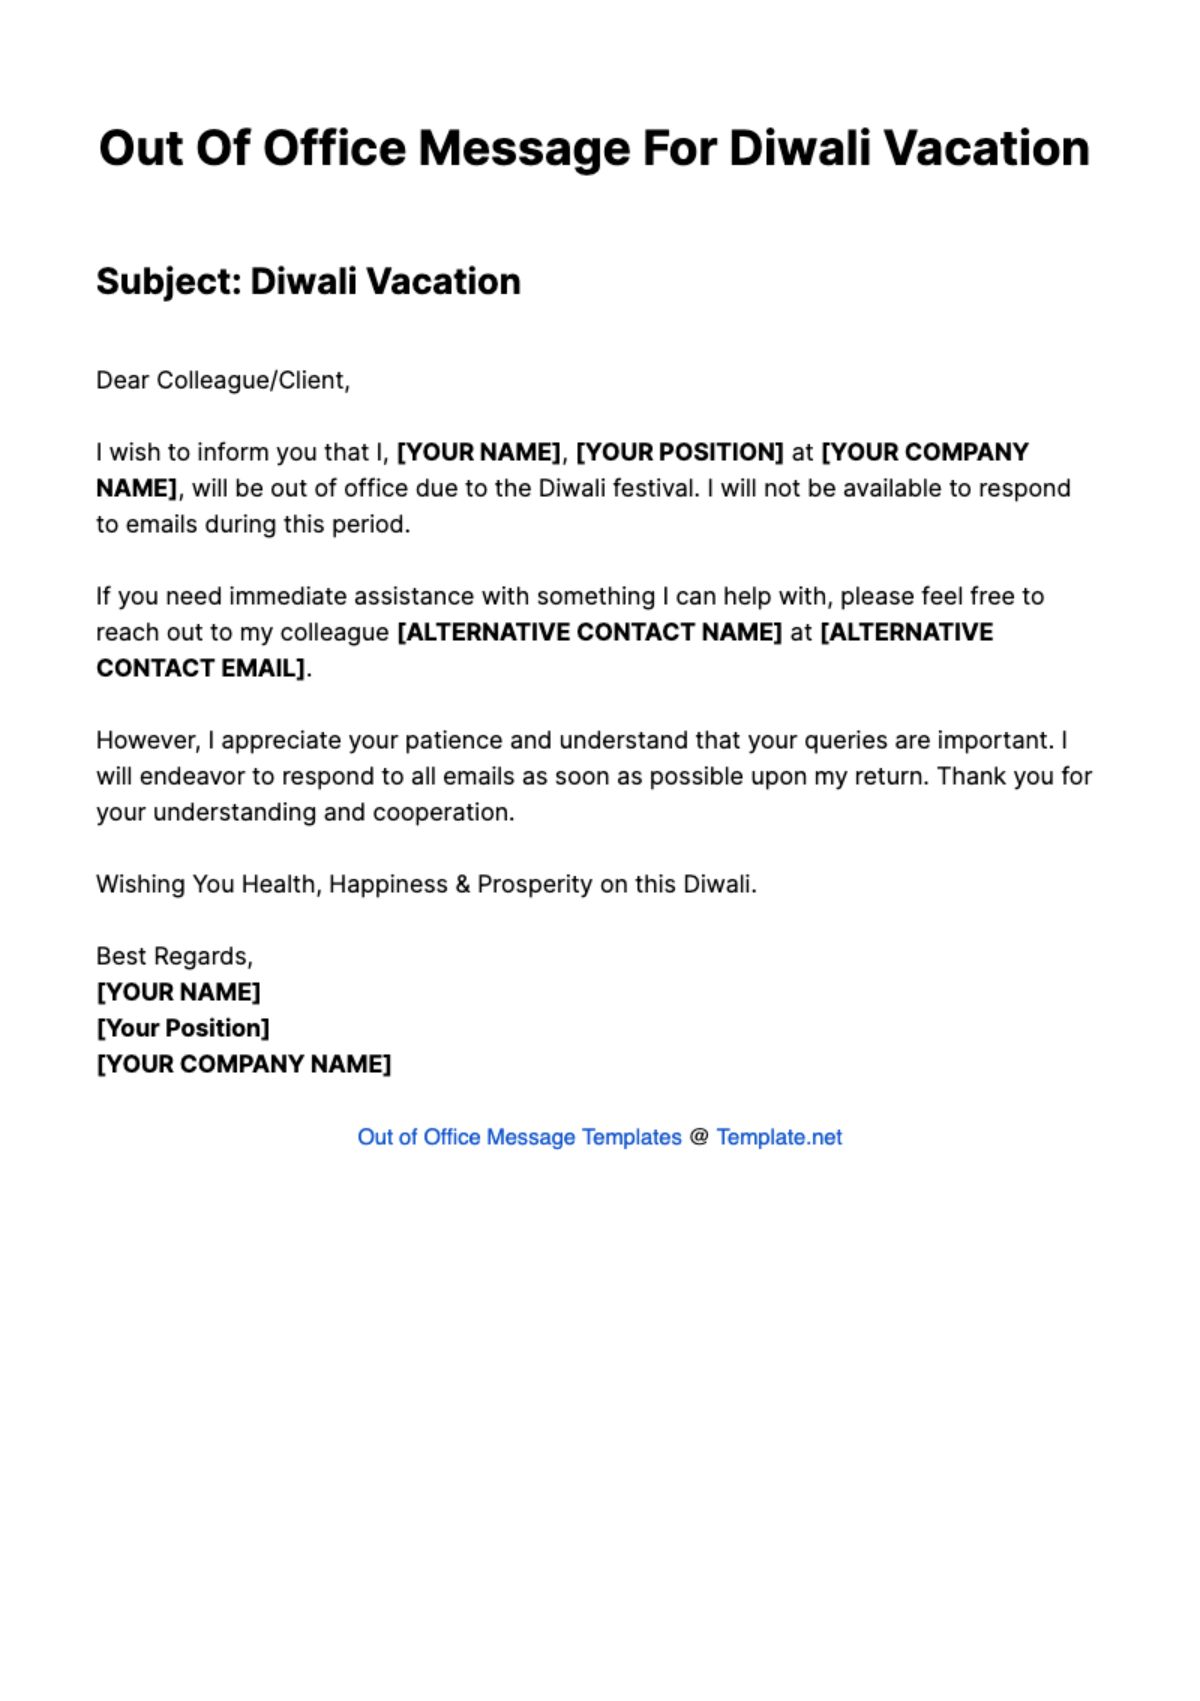 Free Out Of Office Message For Diwali Vacation Template